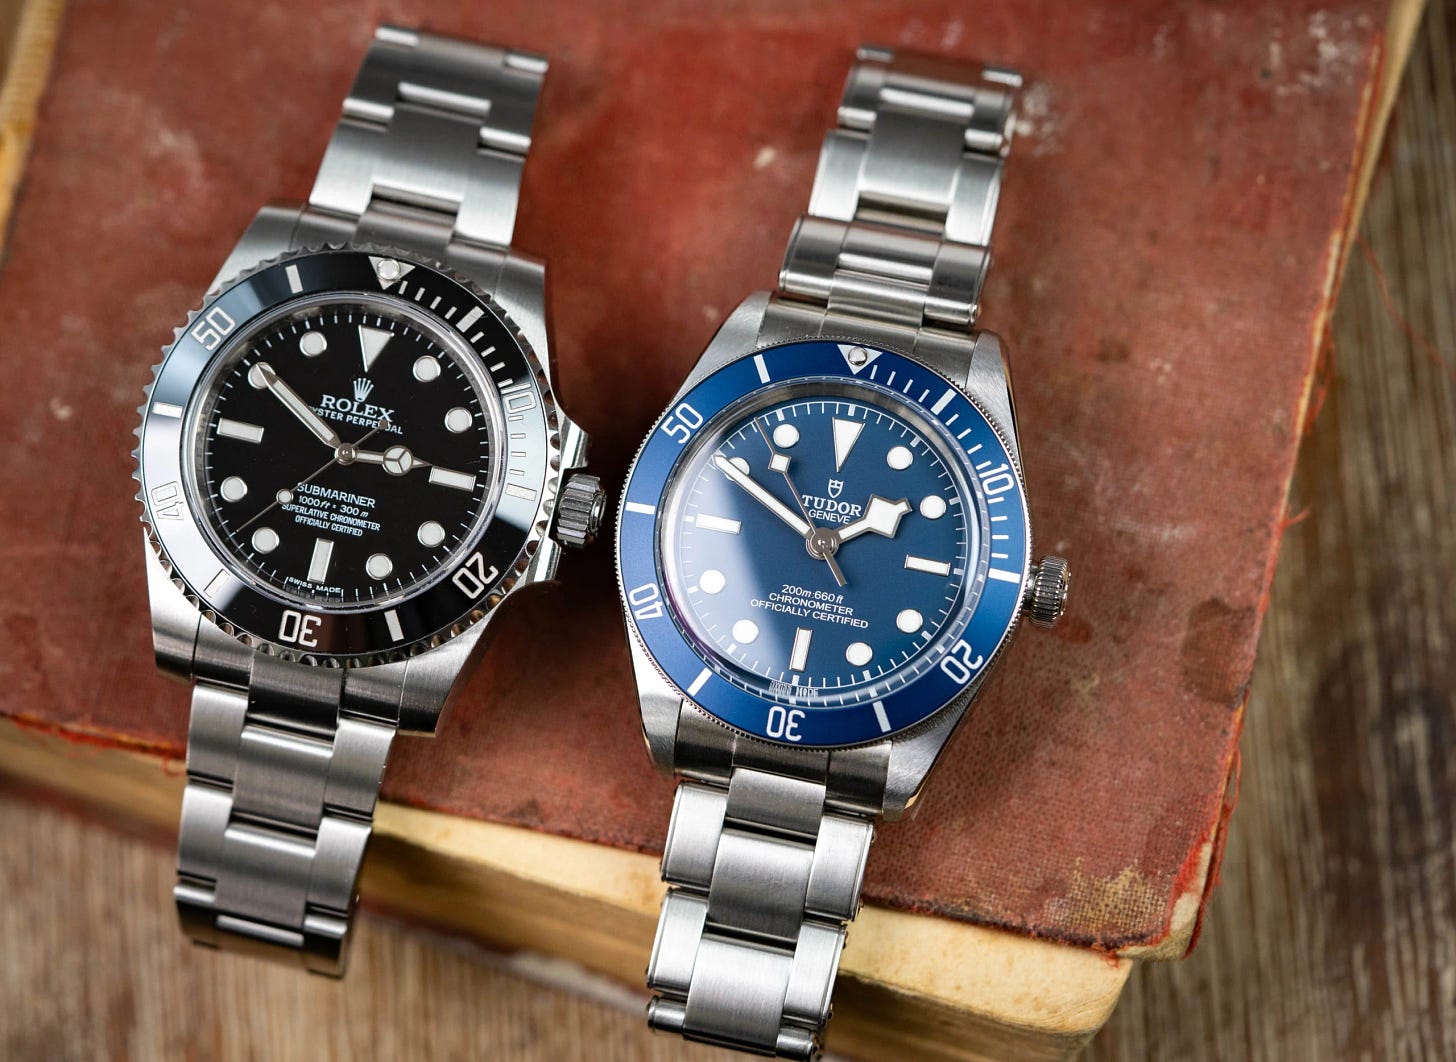 Tudor vs Rolex: Which watch brand is right for you?